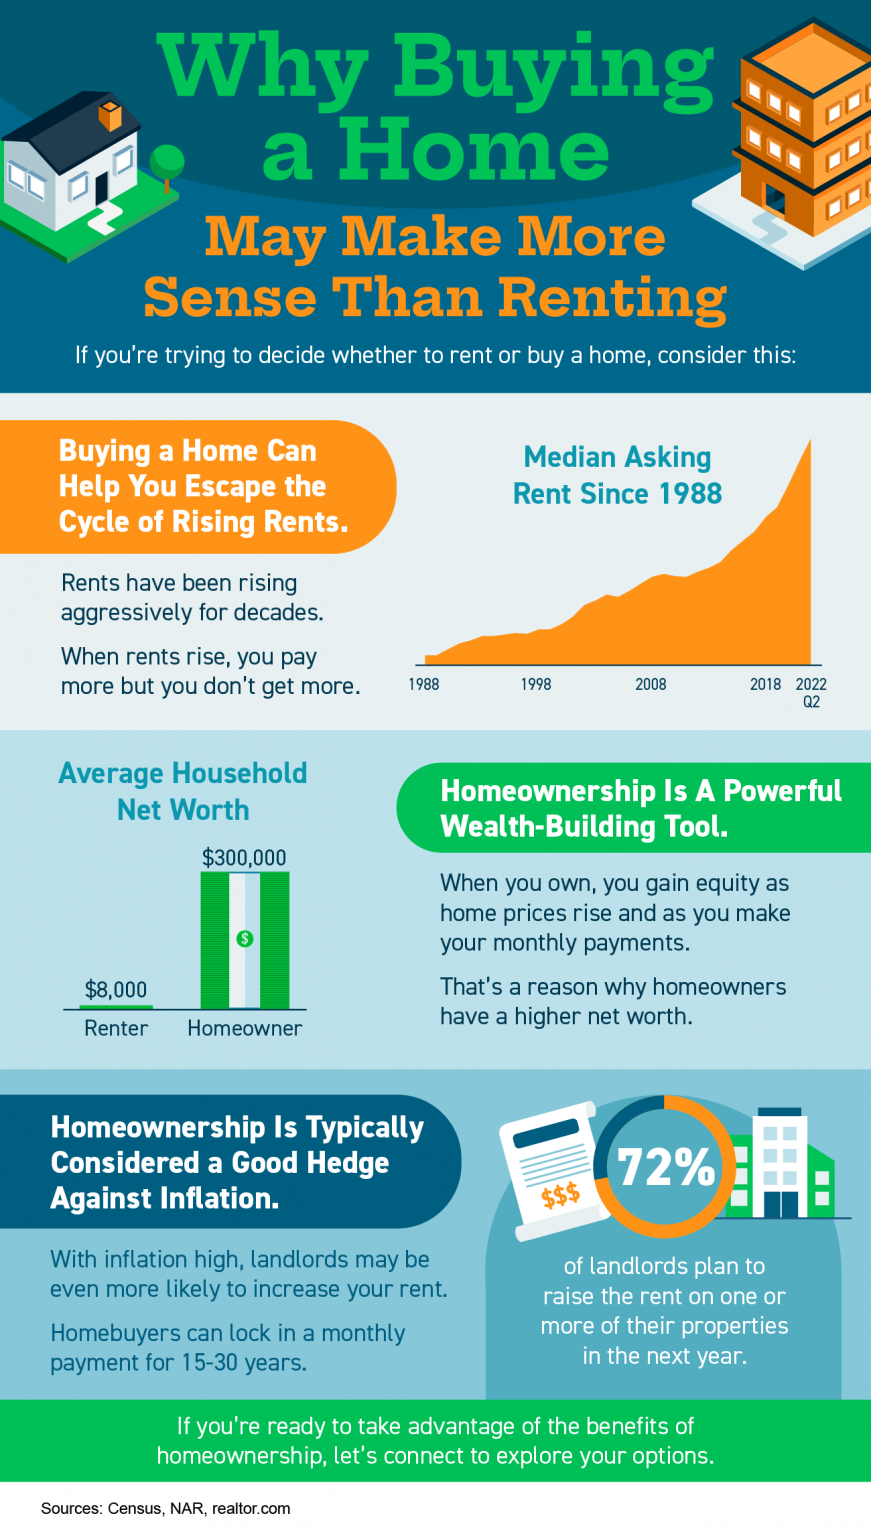 Why Buying a Home May Make More Sense Than Renting [INFOGRAPHIC]